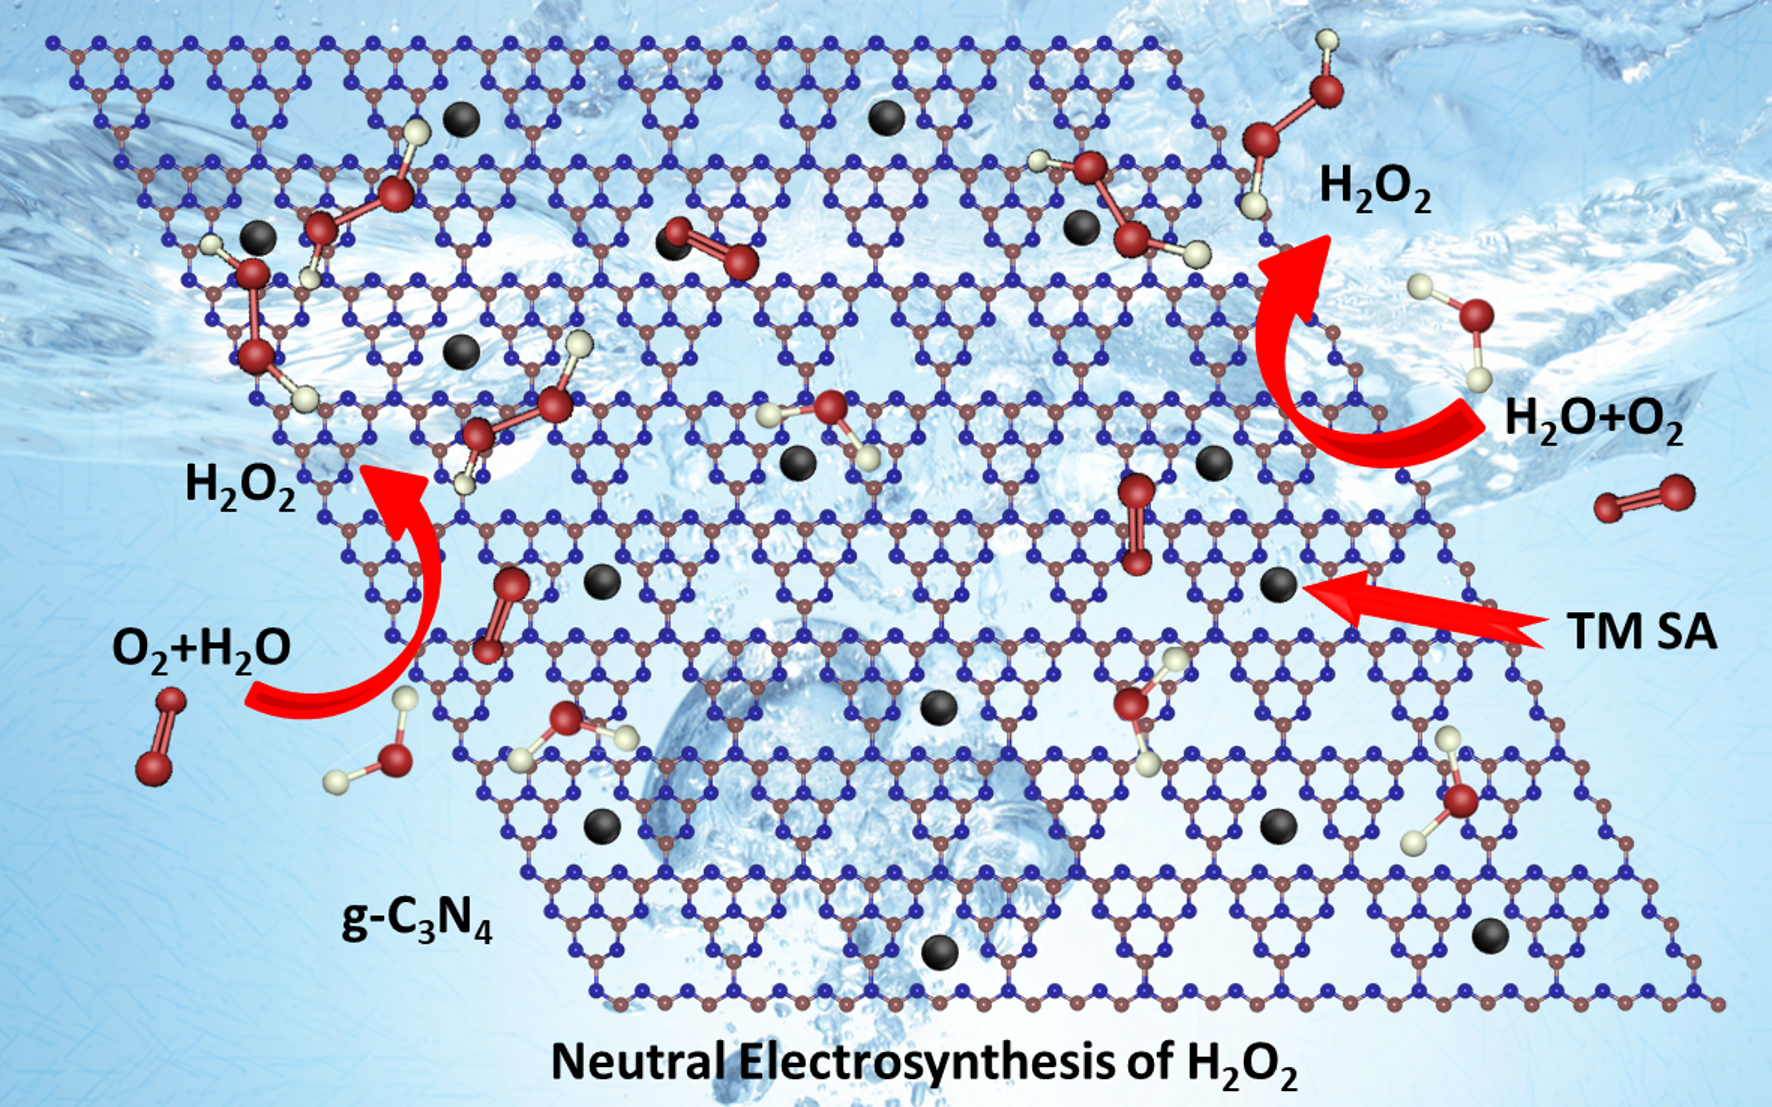 Scheme showing H2O2 production from H2O and O2 on a modified graphitic carbon nitride sheet.